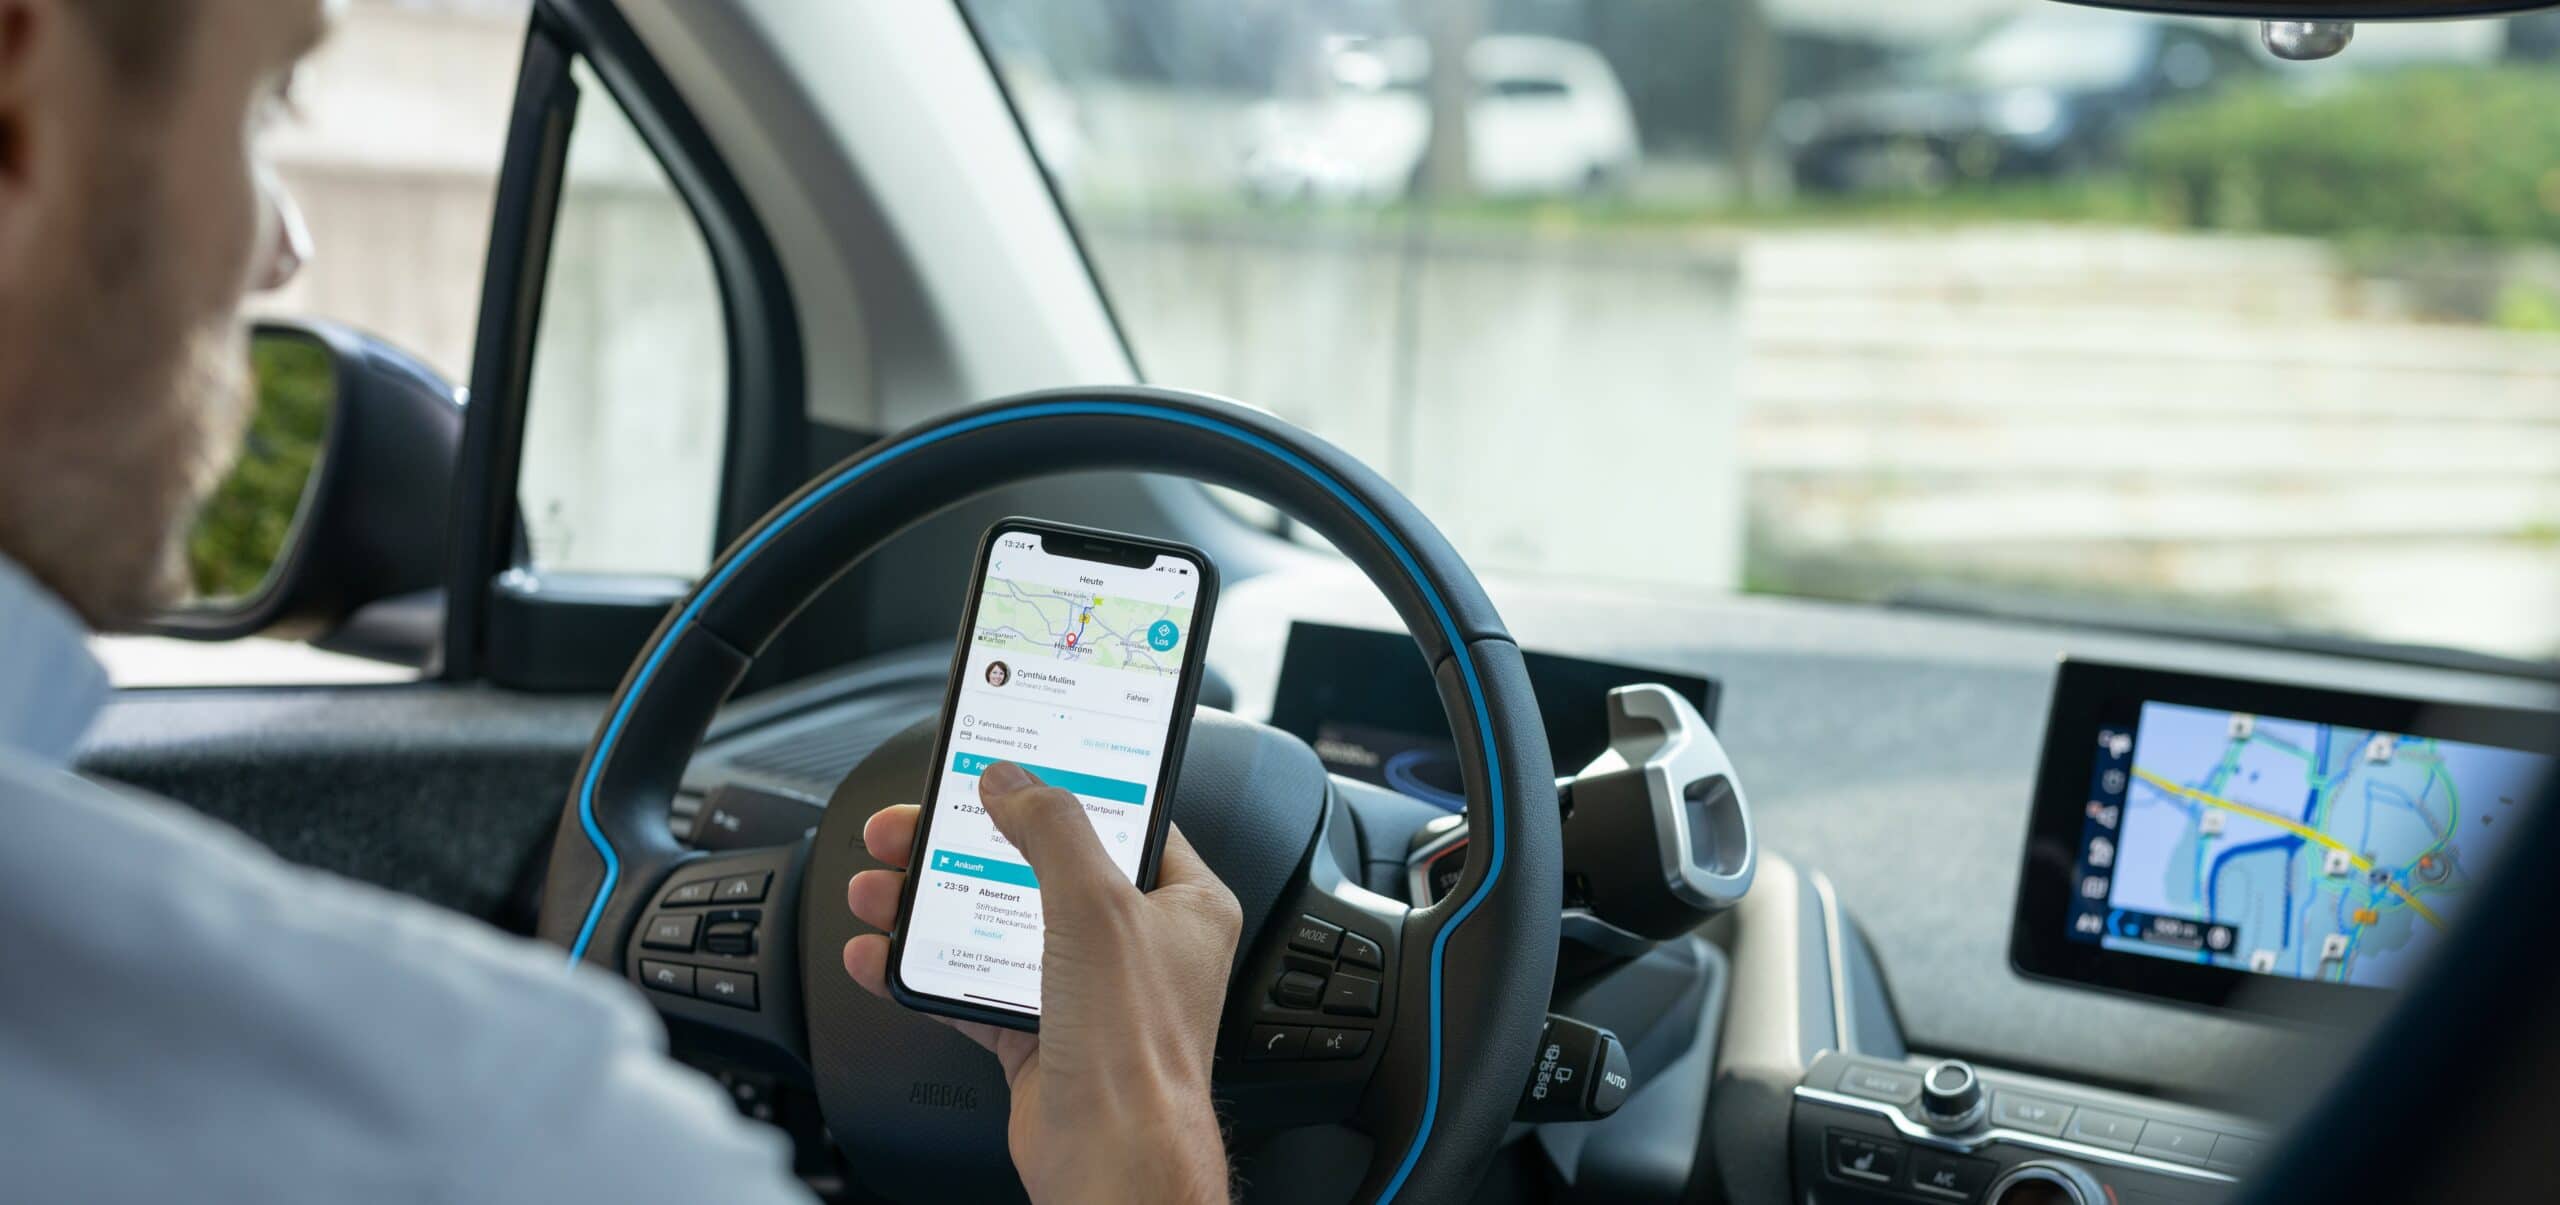 Driver using the smart ride-sharing solution twogo as an app on his smartphone